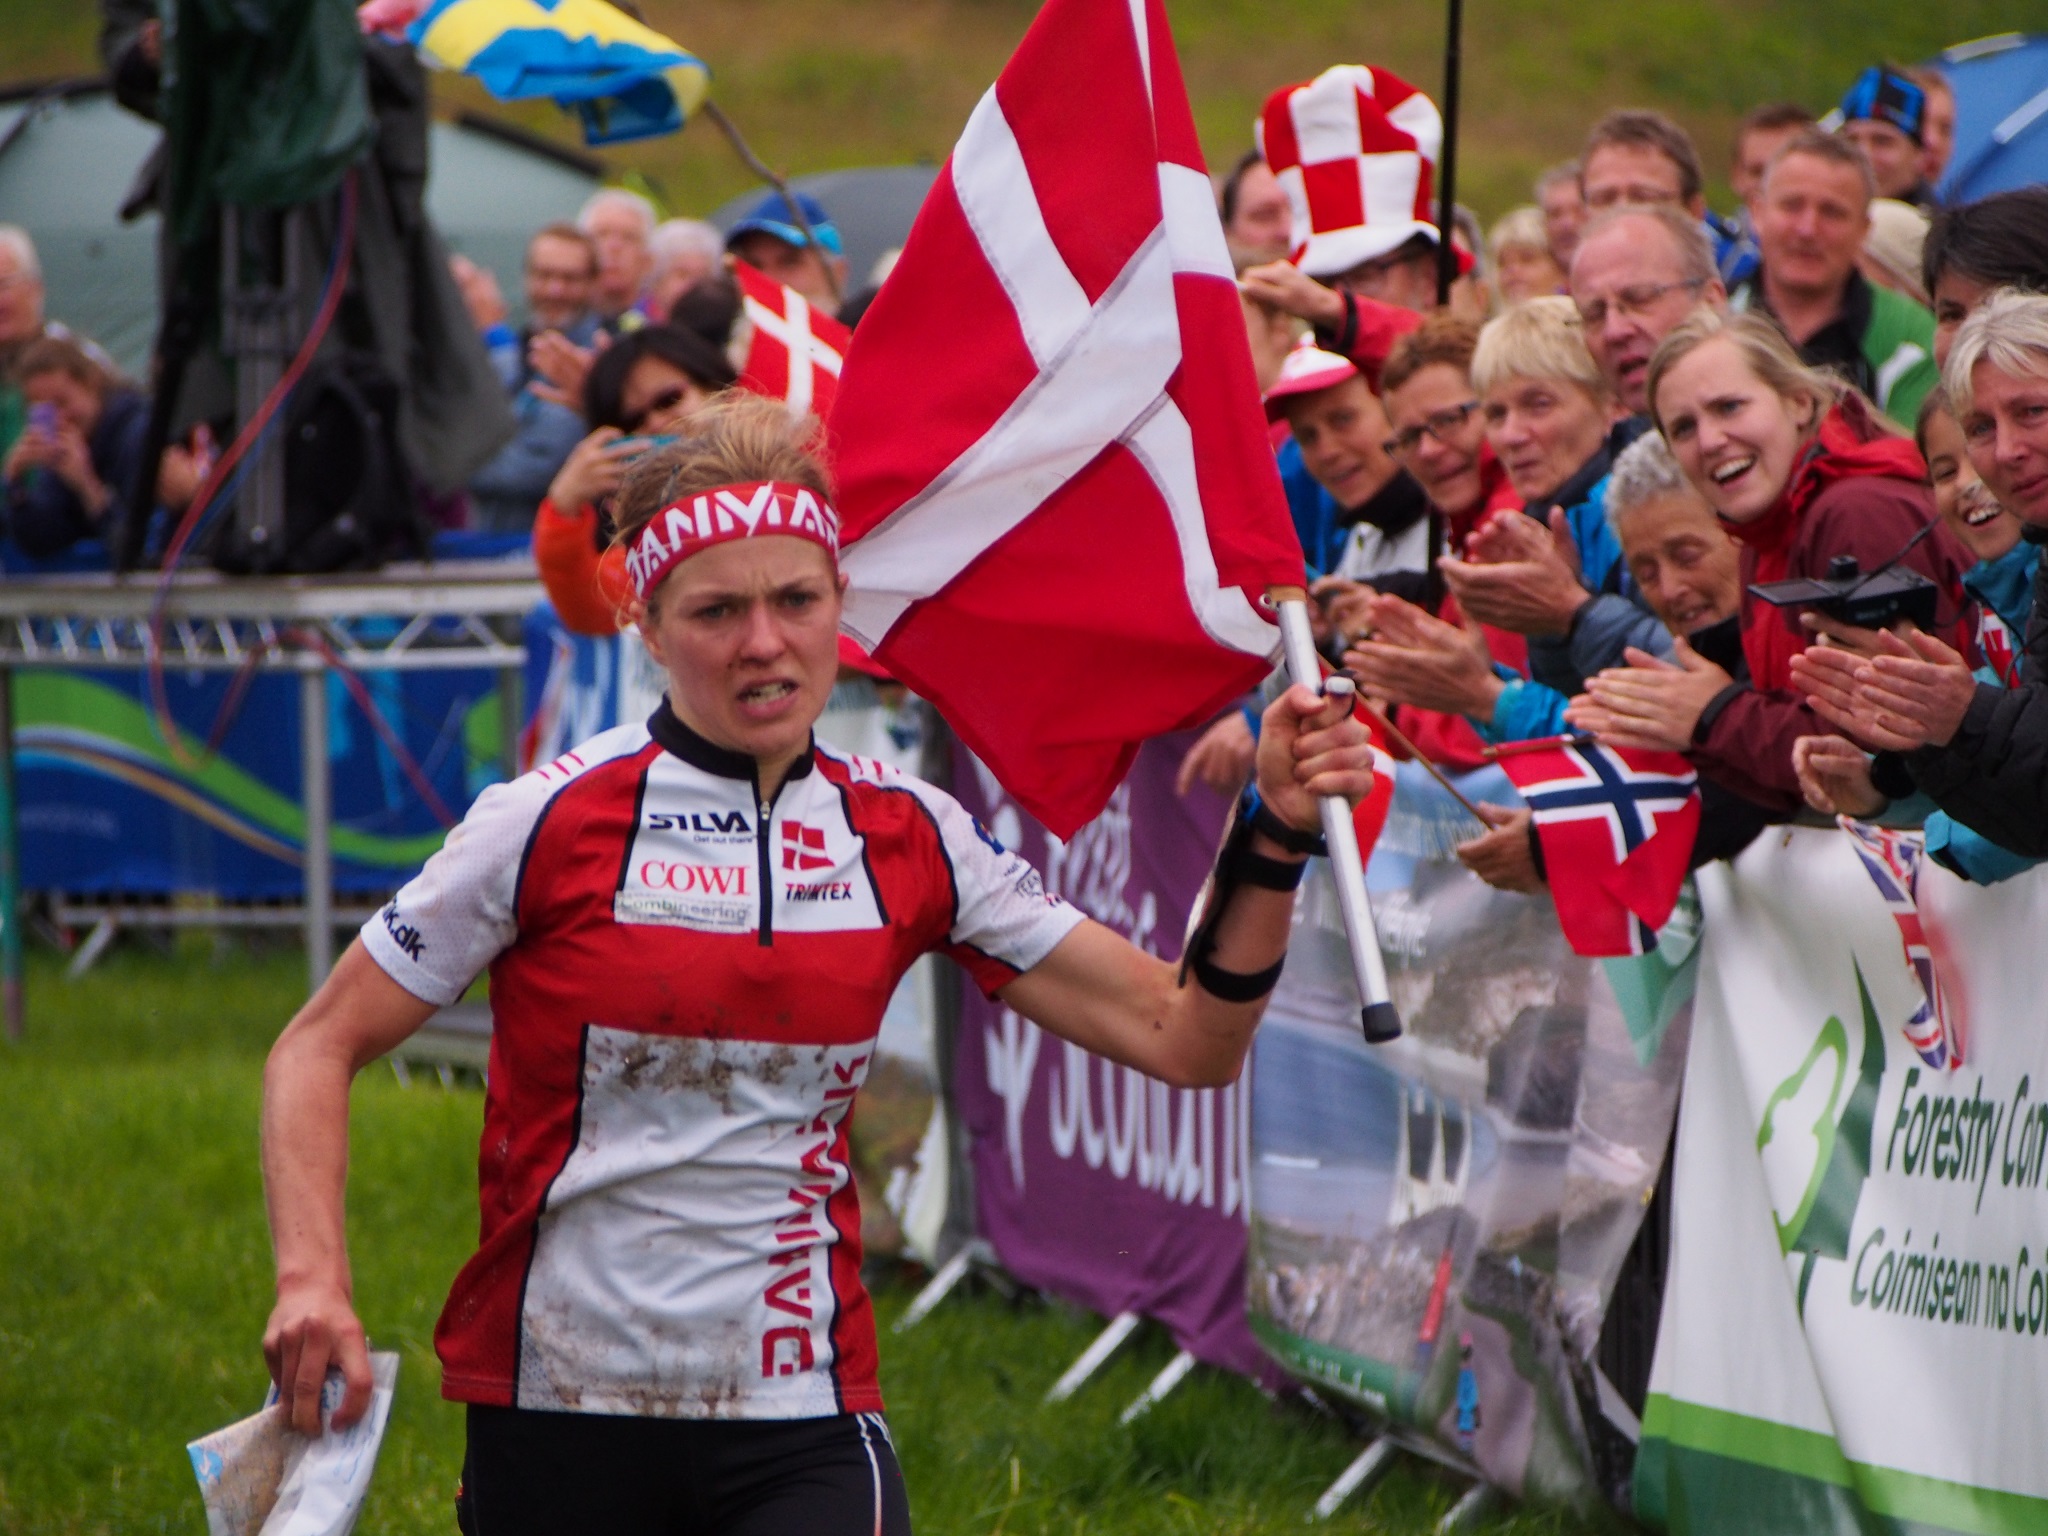 It was a good year for Denmark, Ida Bobach World Champion at the finish of the Long Race in Glen Affric. Courtesy Liveblog http://www.woc2015.org/liveblog/long